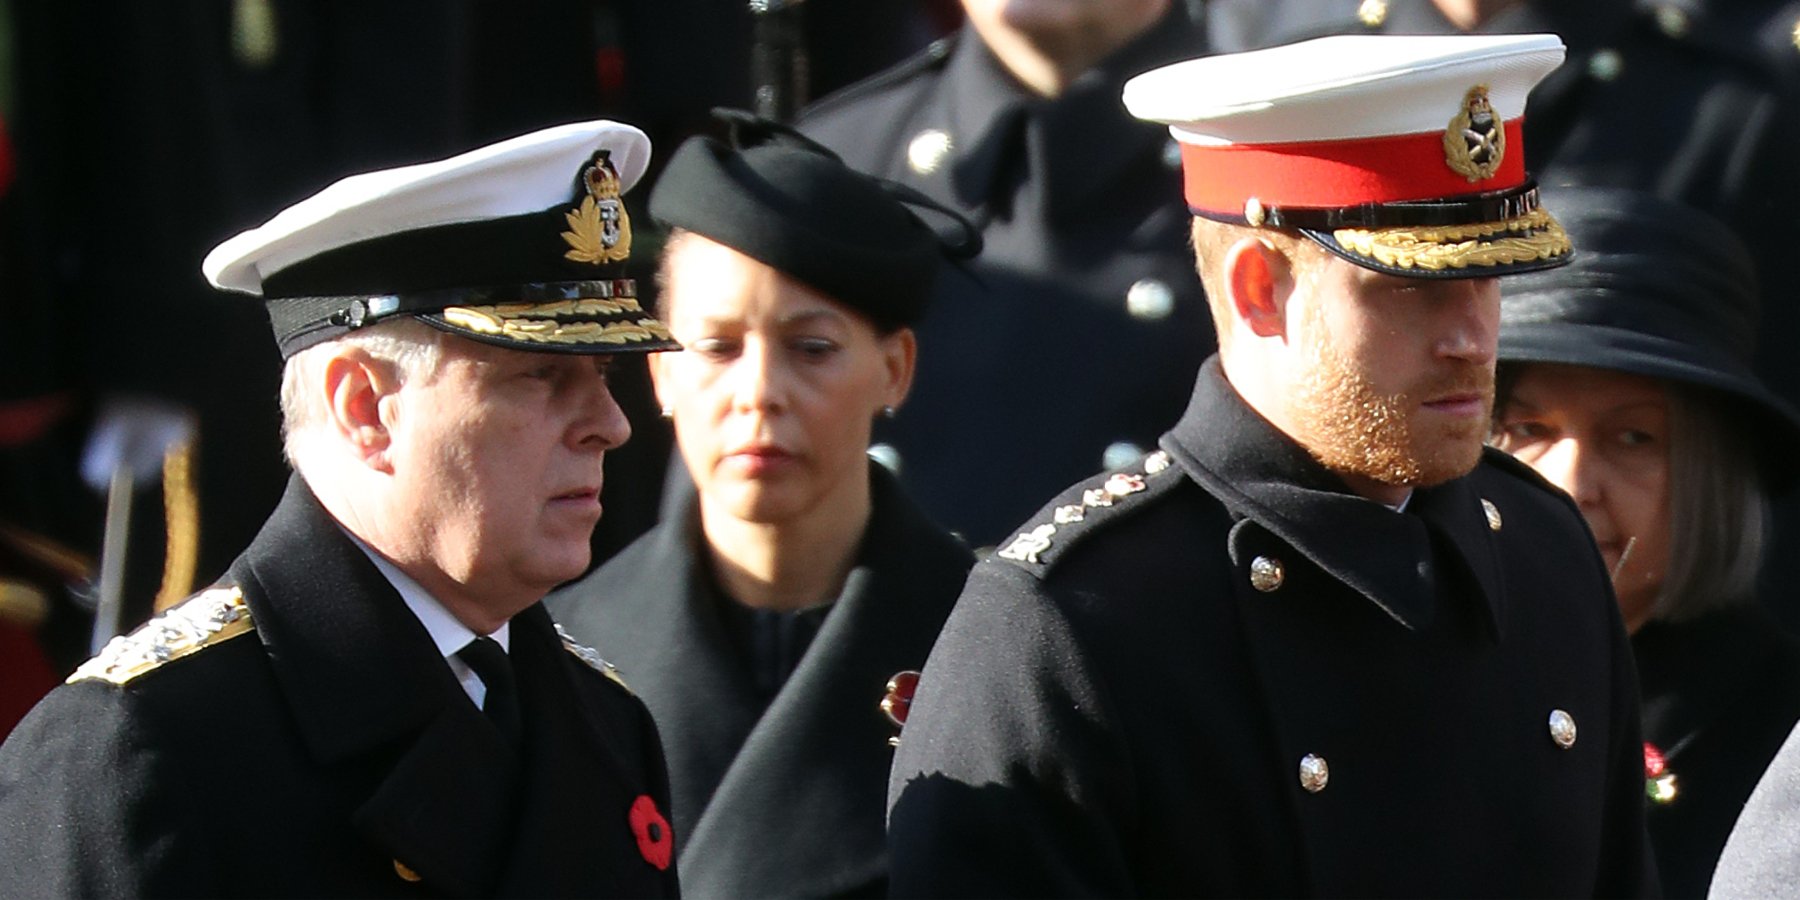 Prince Andrew and Prince Harry photographed in military dress in 2018.